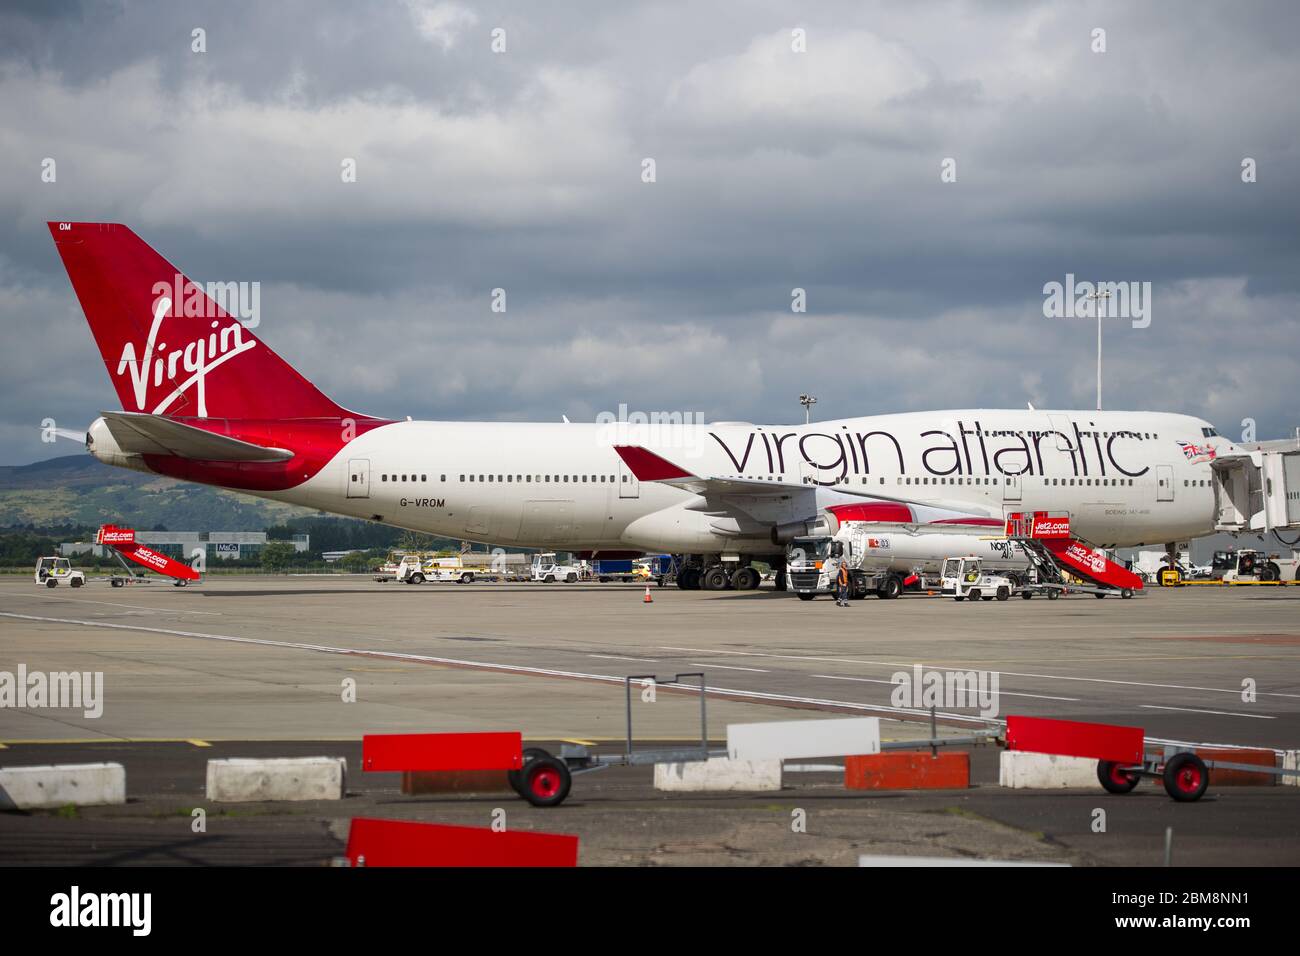 Glasgow, UK. 25 August 2019.  Pictured: Virgin Atlantic Boeing 747-400 reg G-VROM nicknamed Barbarella is one of the long haul wide die body aircraft in Virgin's leisure fleet. Normally covering London Gatwick, this aircraft serves Glasgow 3 times per week. Credit: Colin Fisher/Alamy Live News. Stock Photo